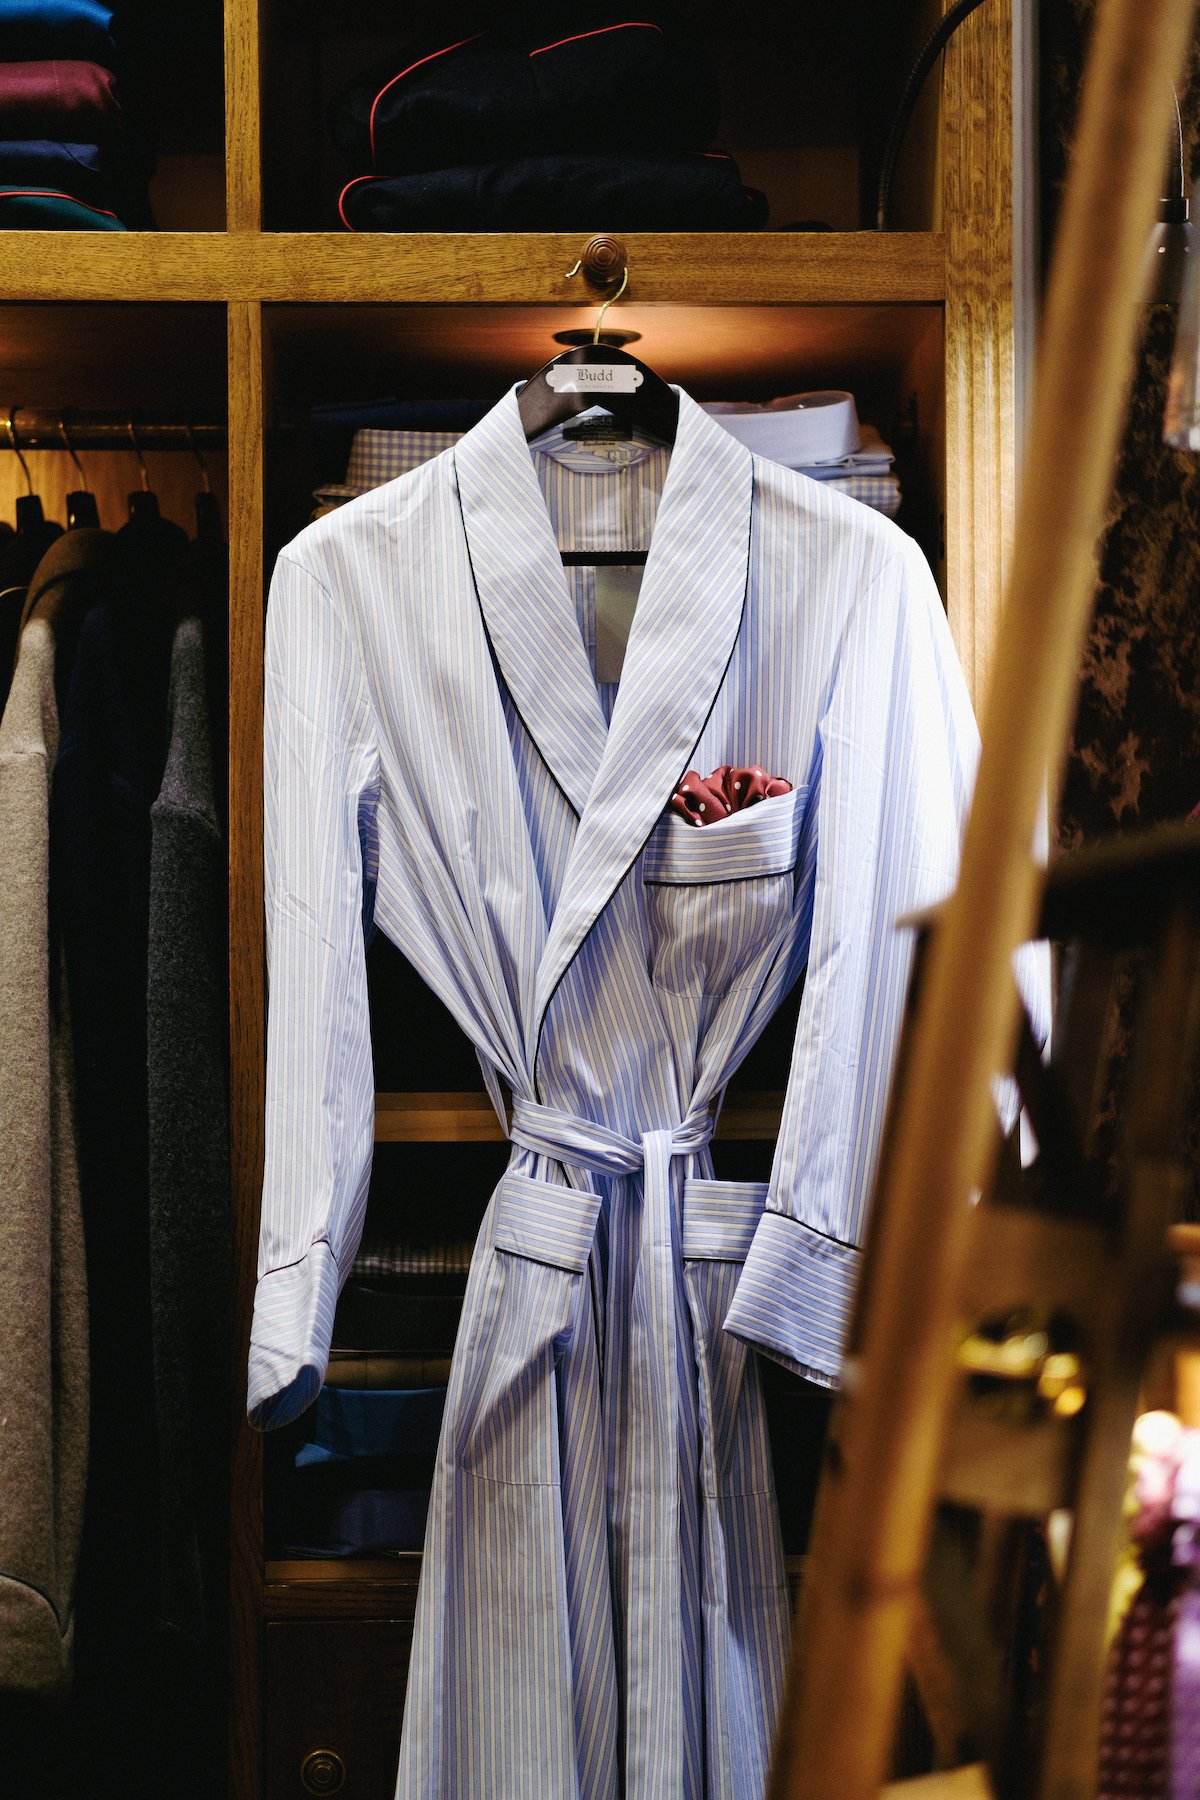 Dressing Gown & Robes For Men